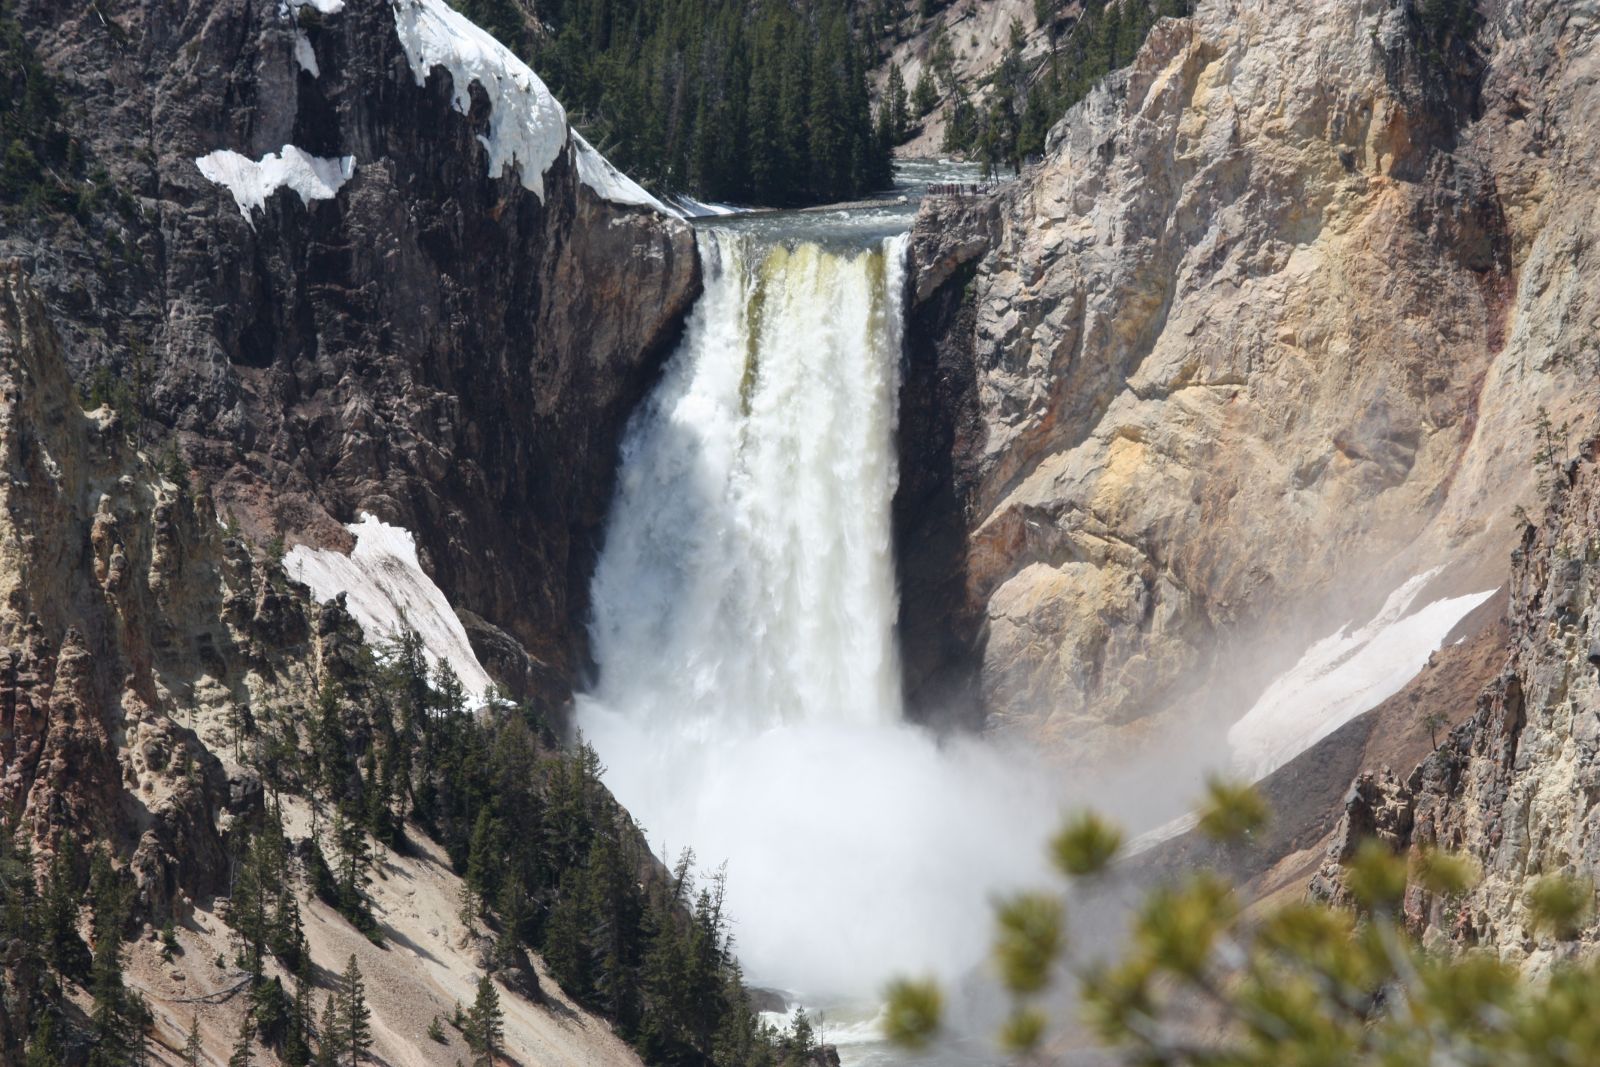 One of many Waterfalls in Yellowstone